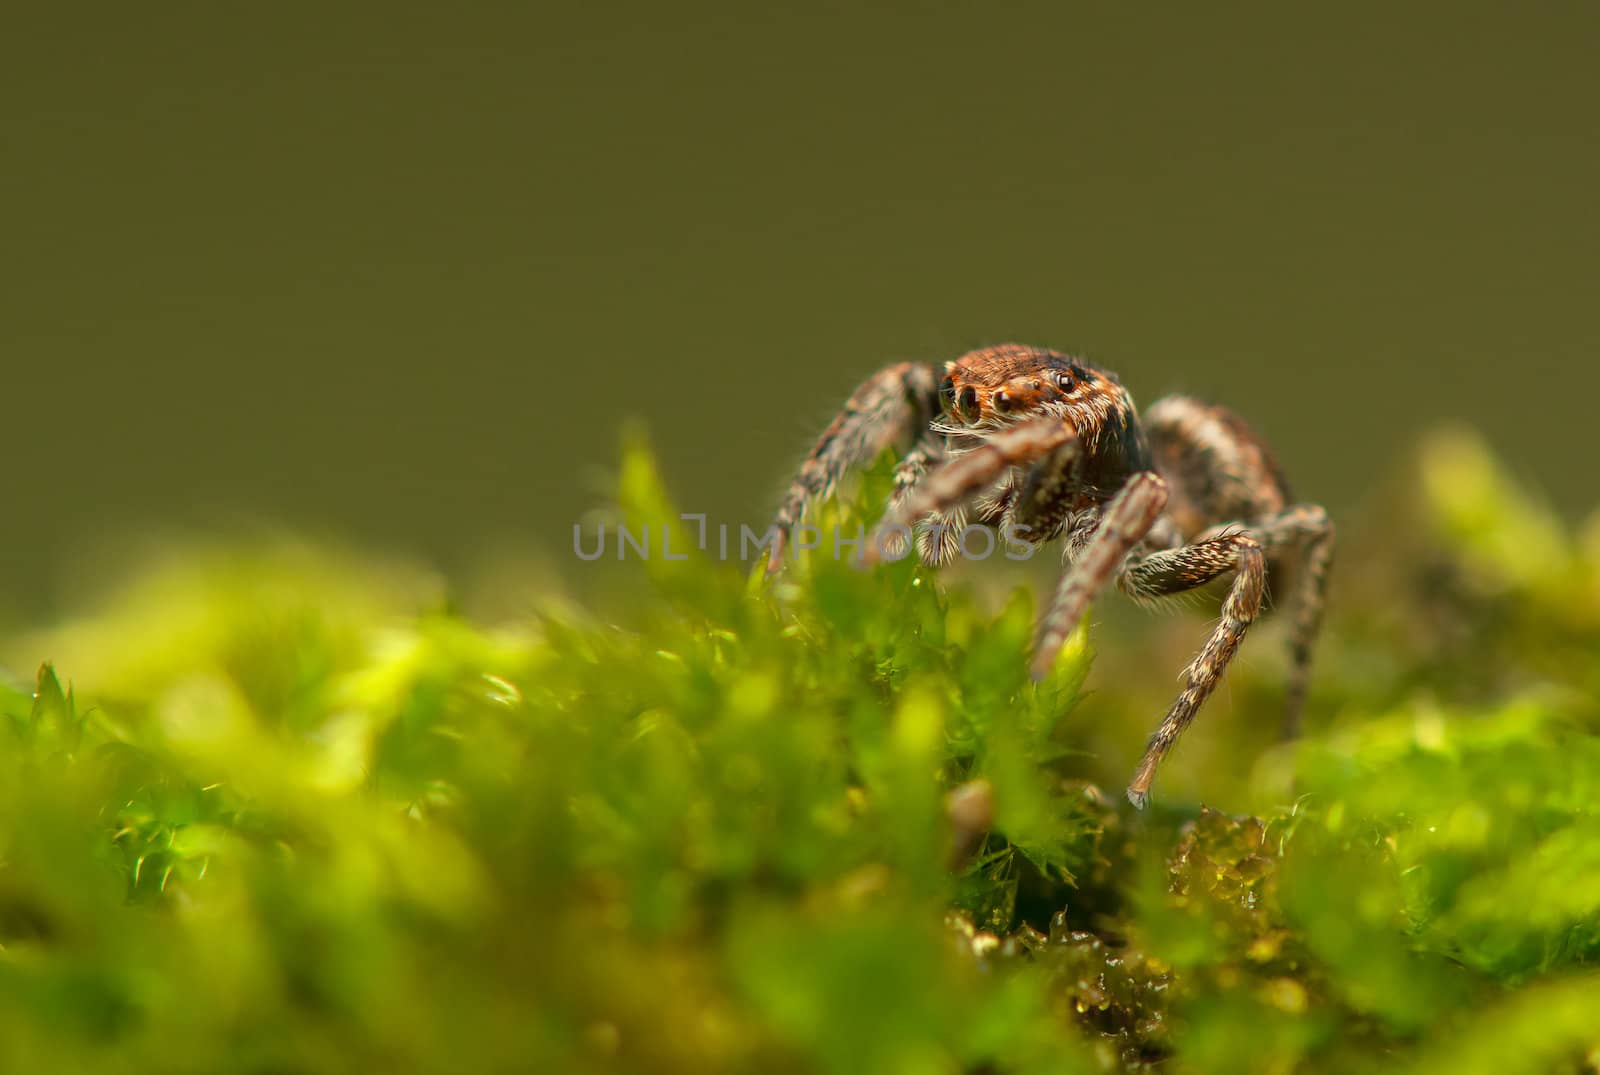 Evarcha - Jumping spider by Gucio_55